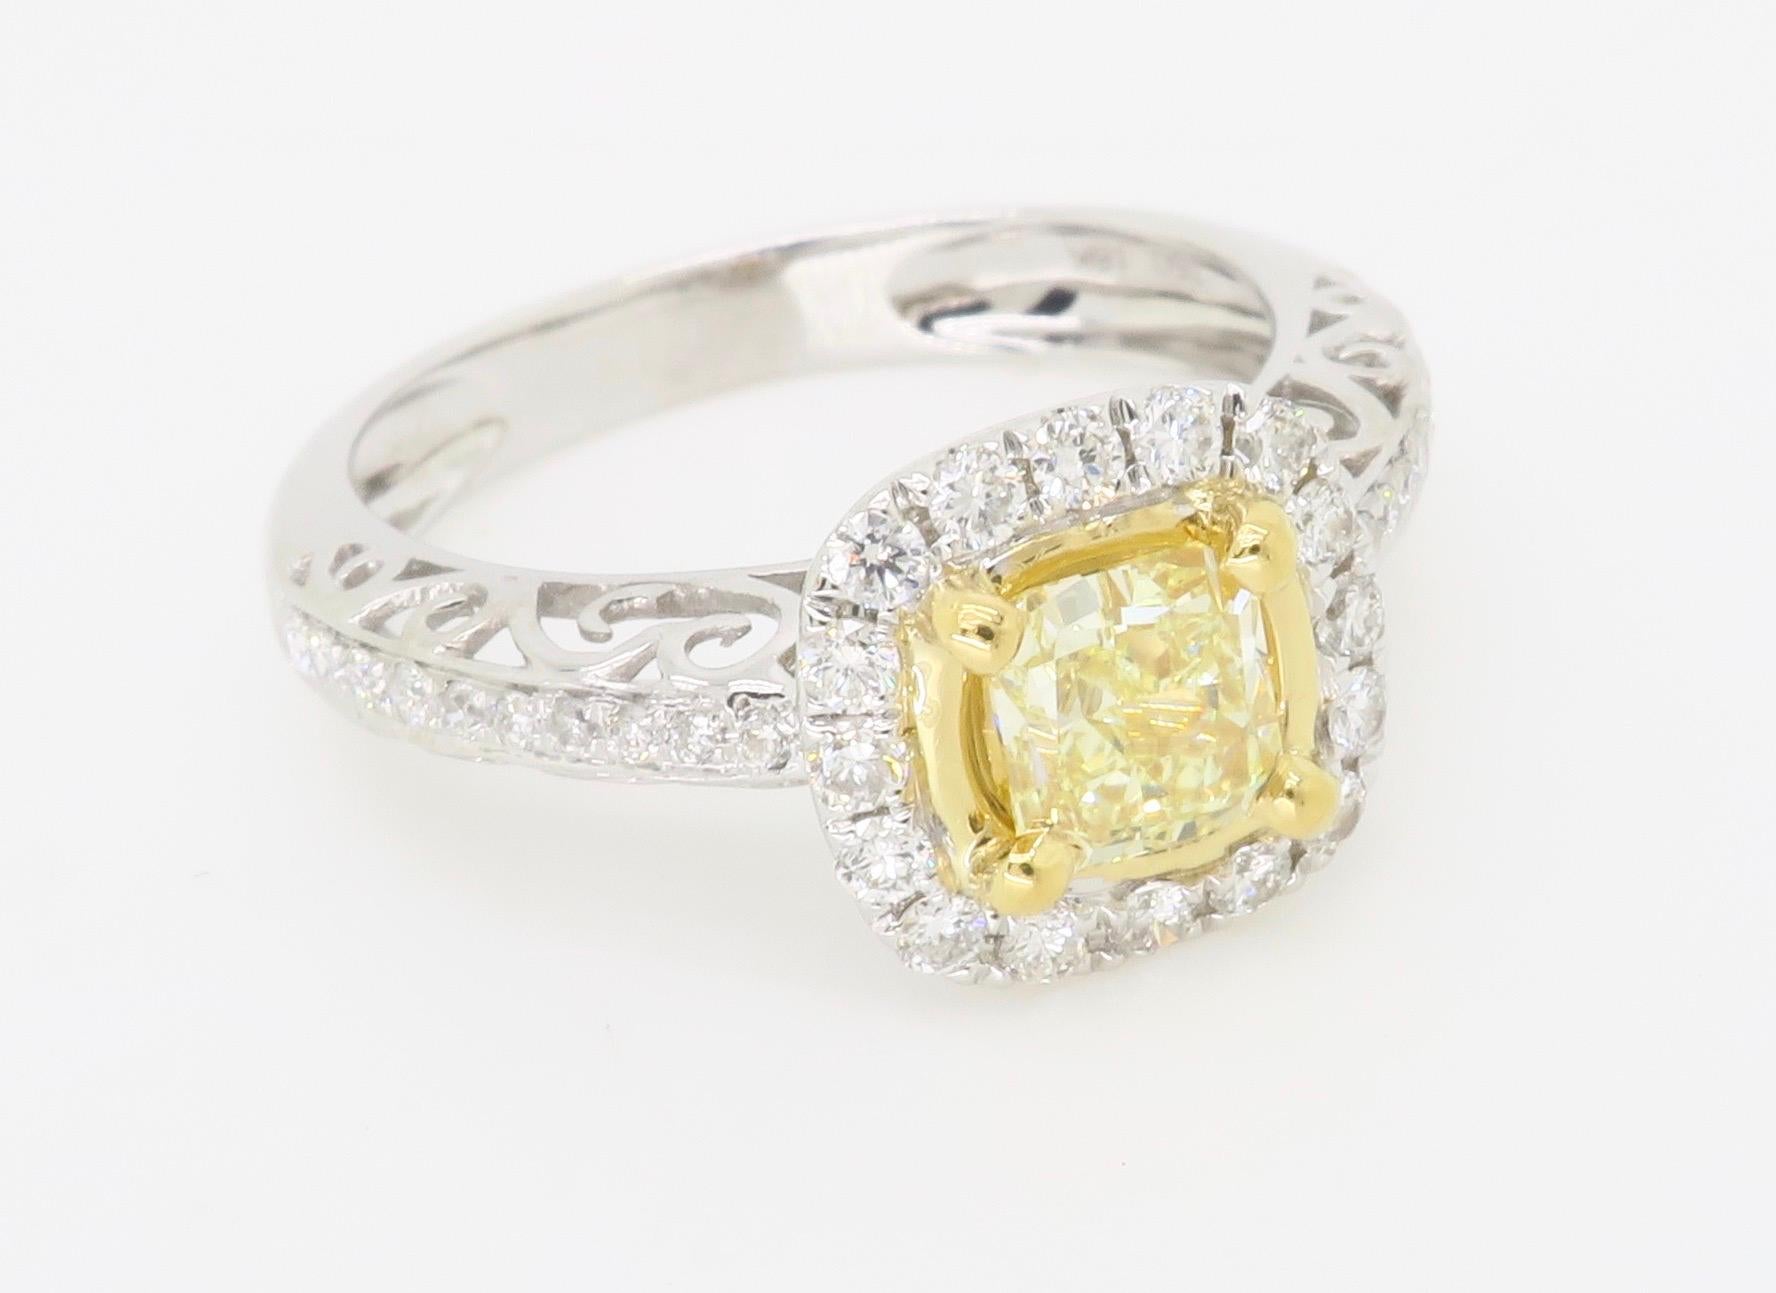 Fancy Yellow Diamond Halo Engagement Ring in 18k In Excellent Condition For Sale In Webster, NY